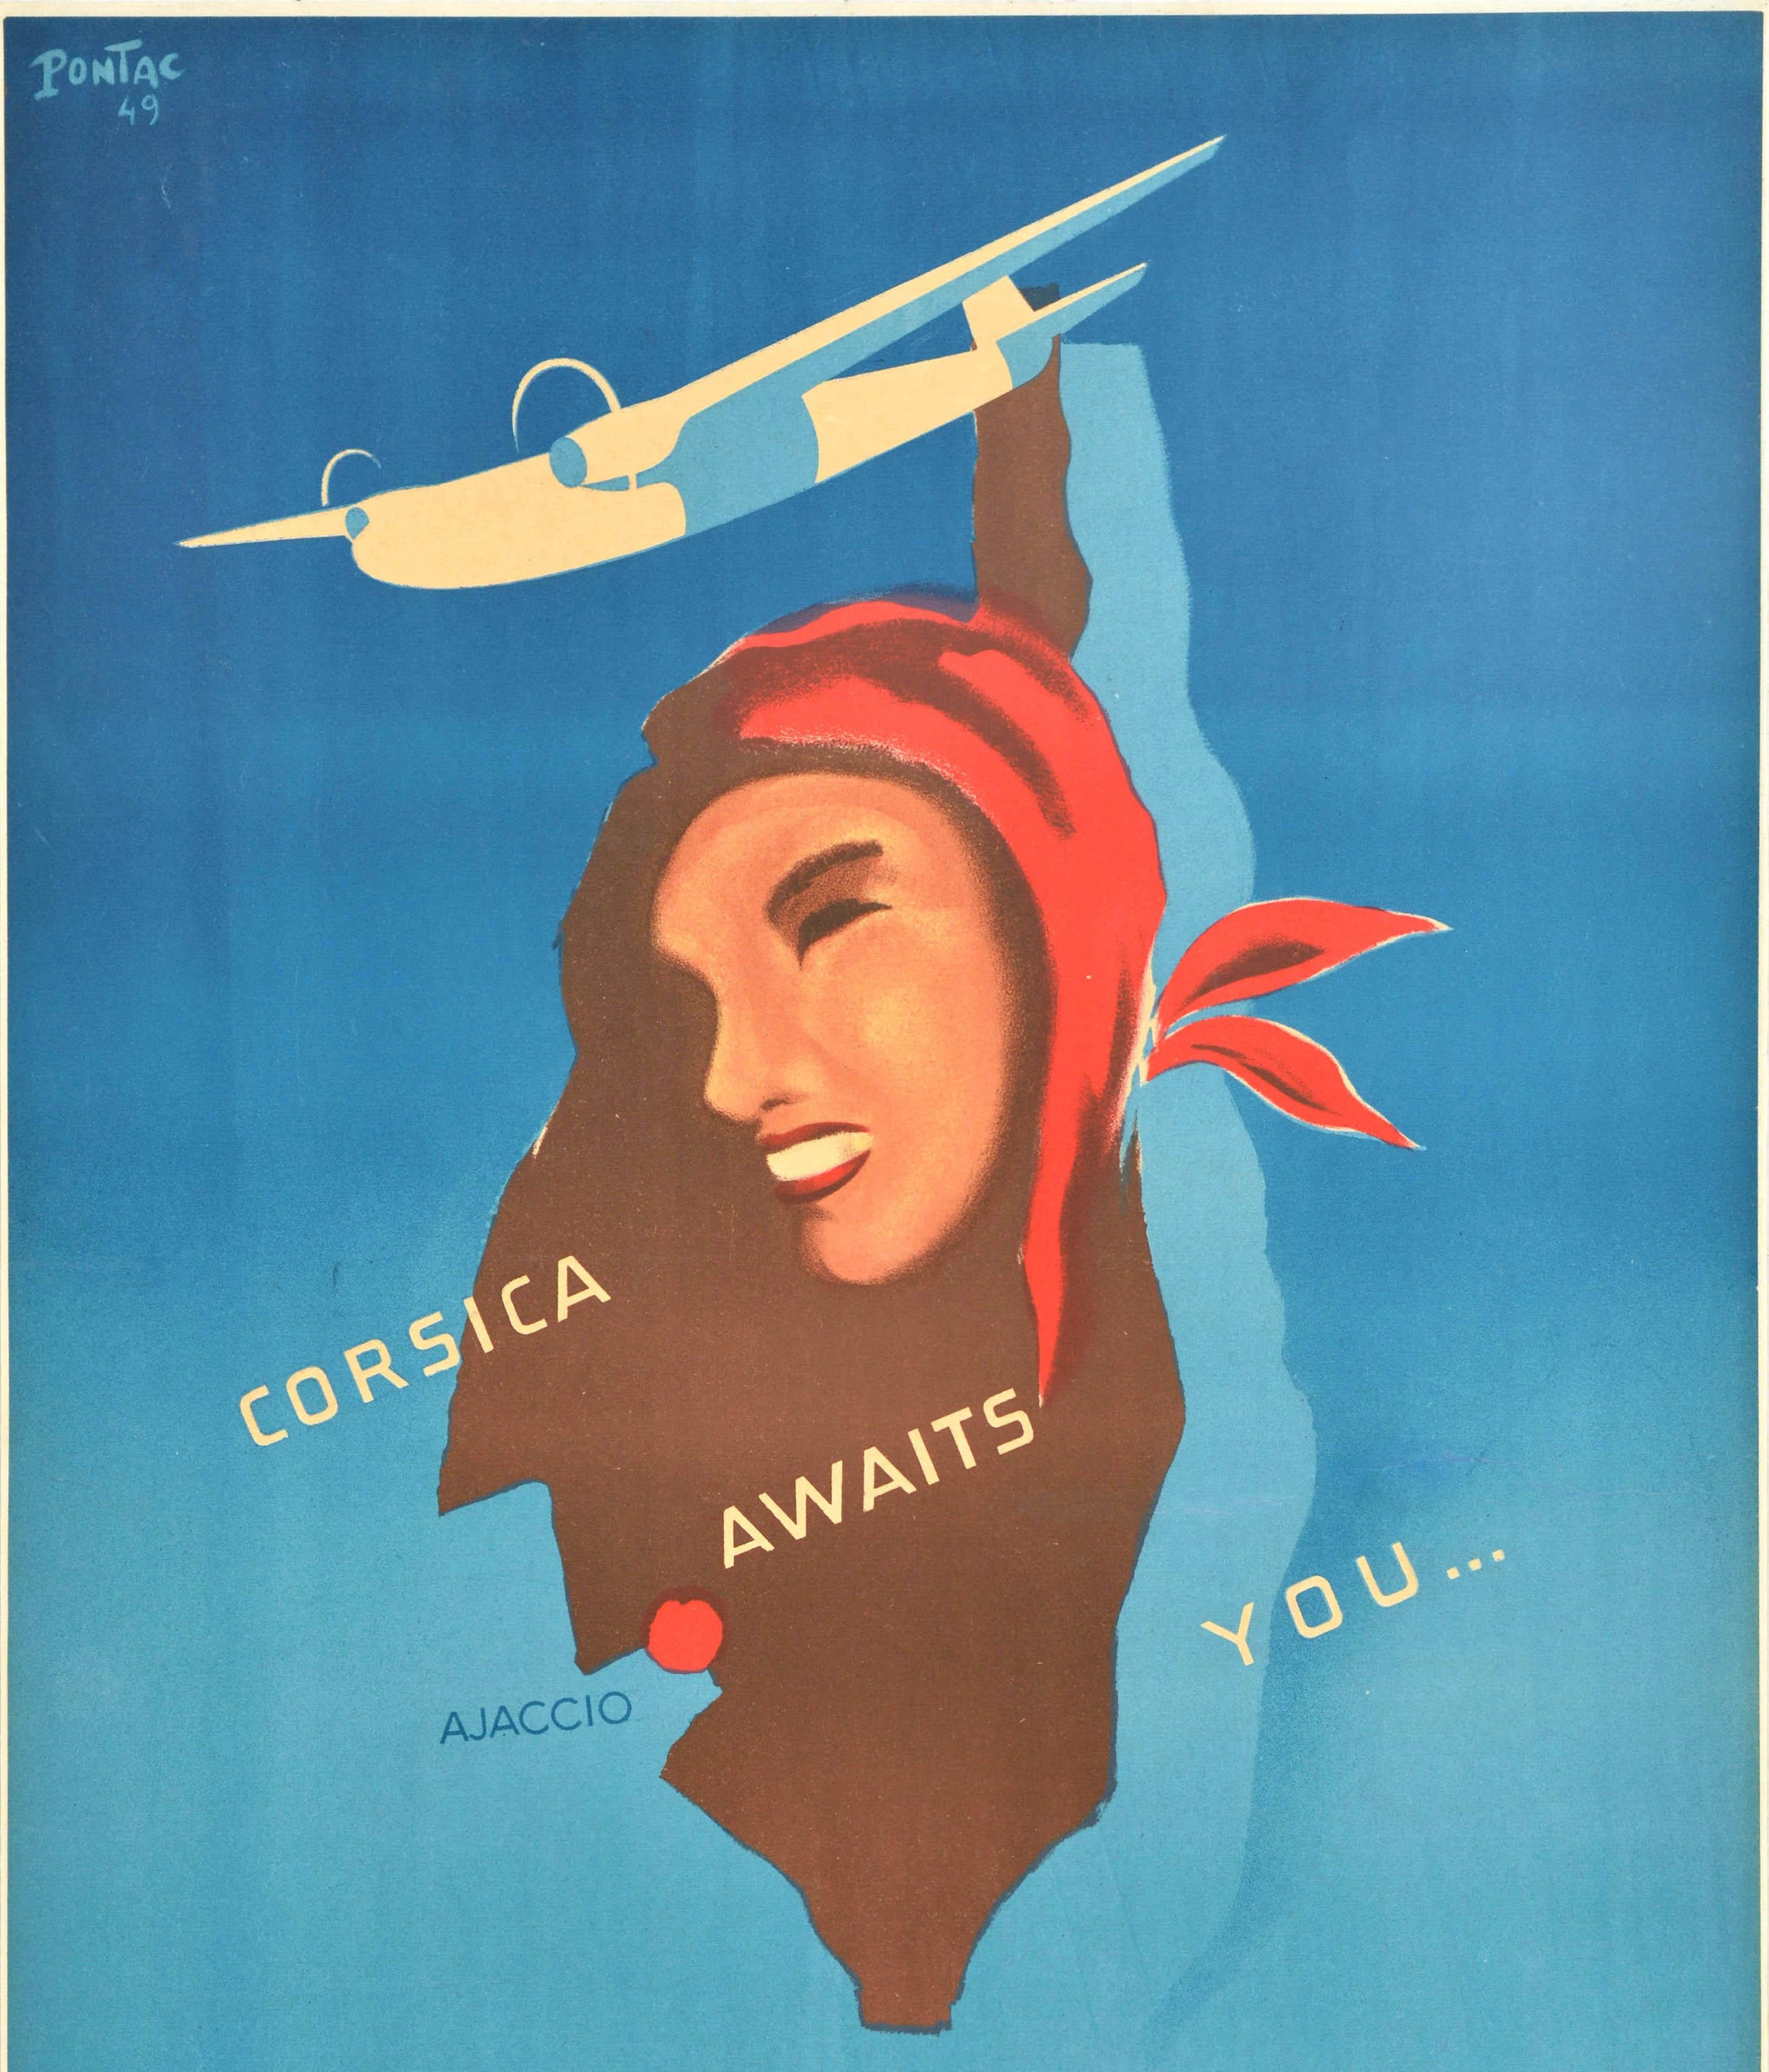 French Original Vintage Travel Advertising Poster Airspan Travel Corsica Awaits You For Sale